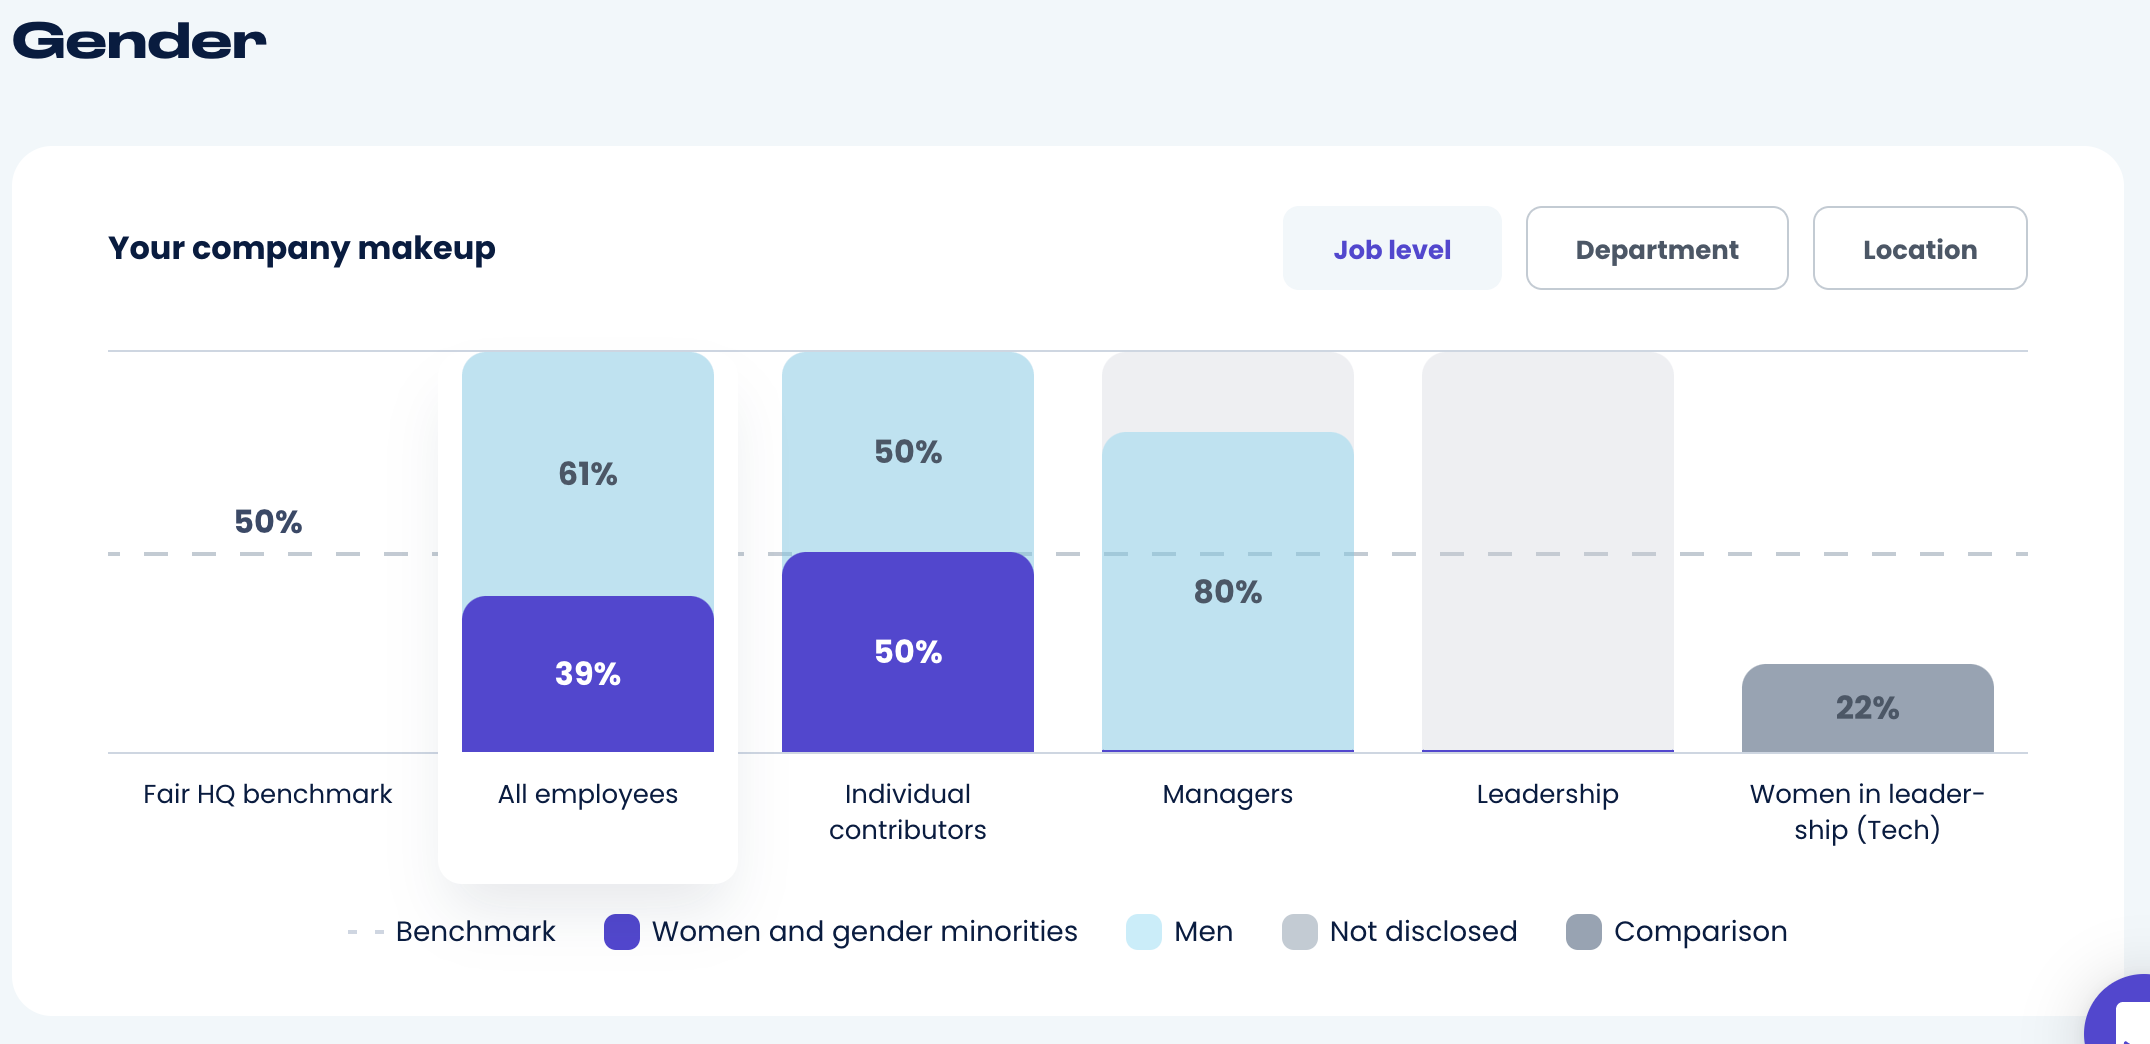 A graph depicting gender diversity across different levels of the business, including individual contributors, managers, leadership and all employees